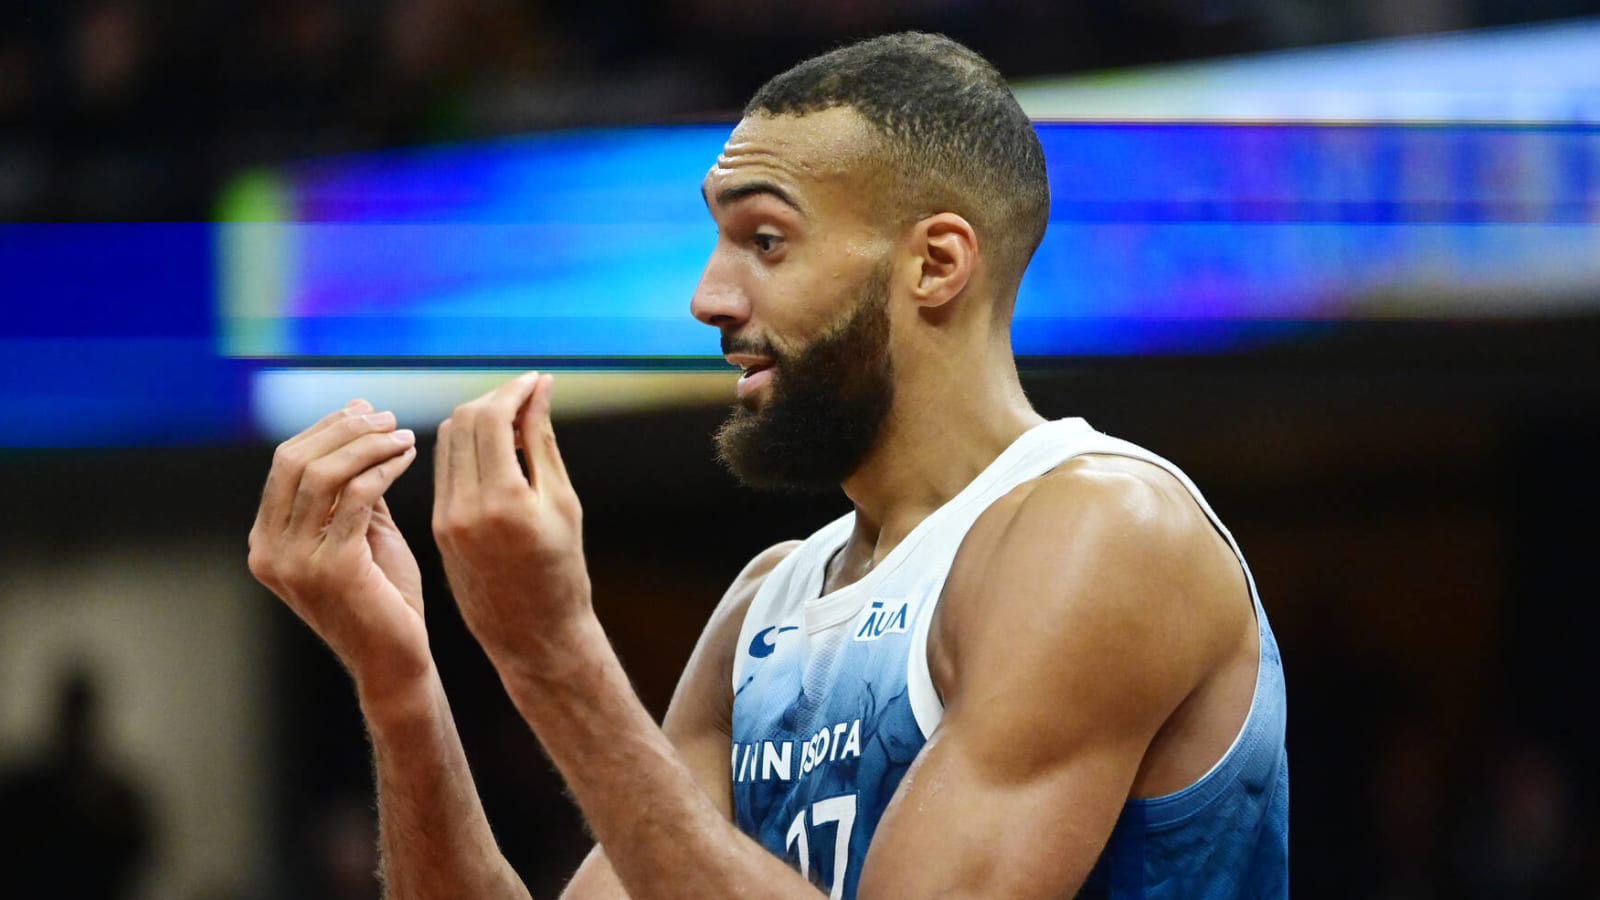 Watch: Rudy Gobert’s ‘money sign’ costs Timberwolves the game